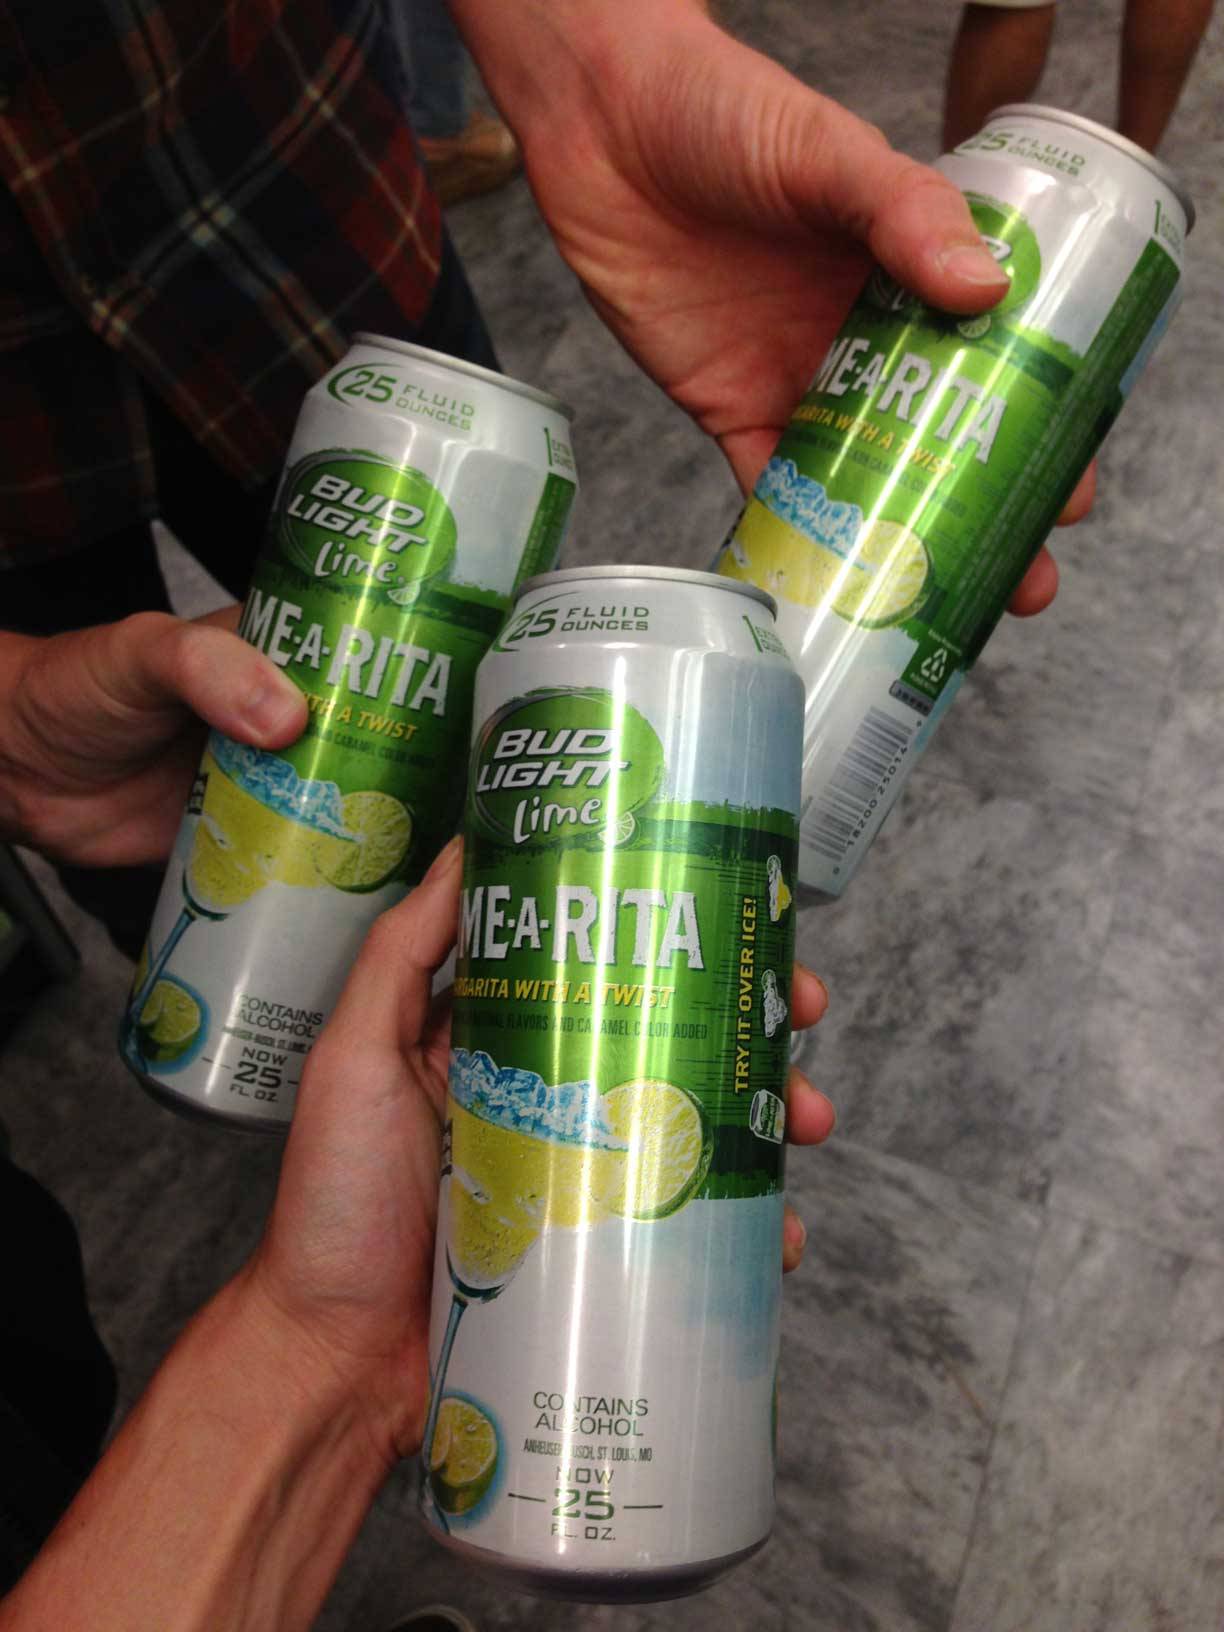 Some giant Bud Light Lime-a-Rita cans